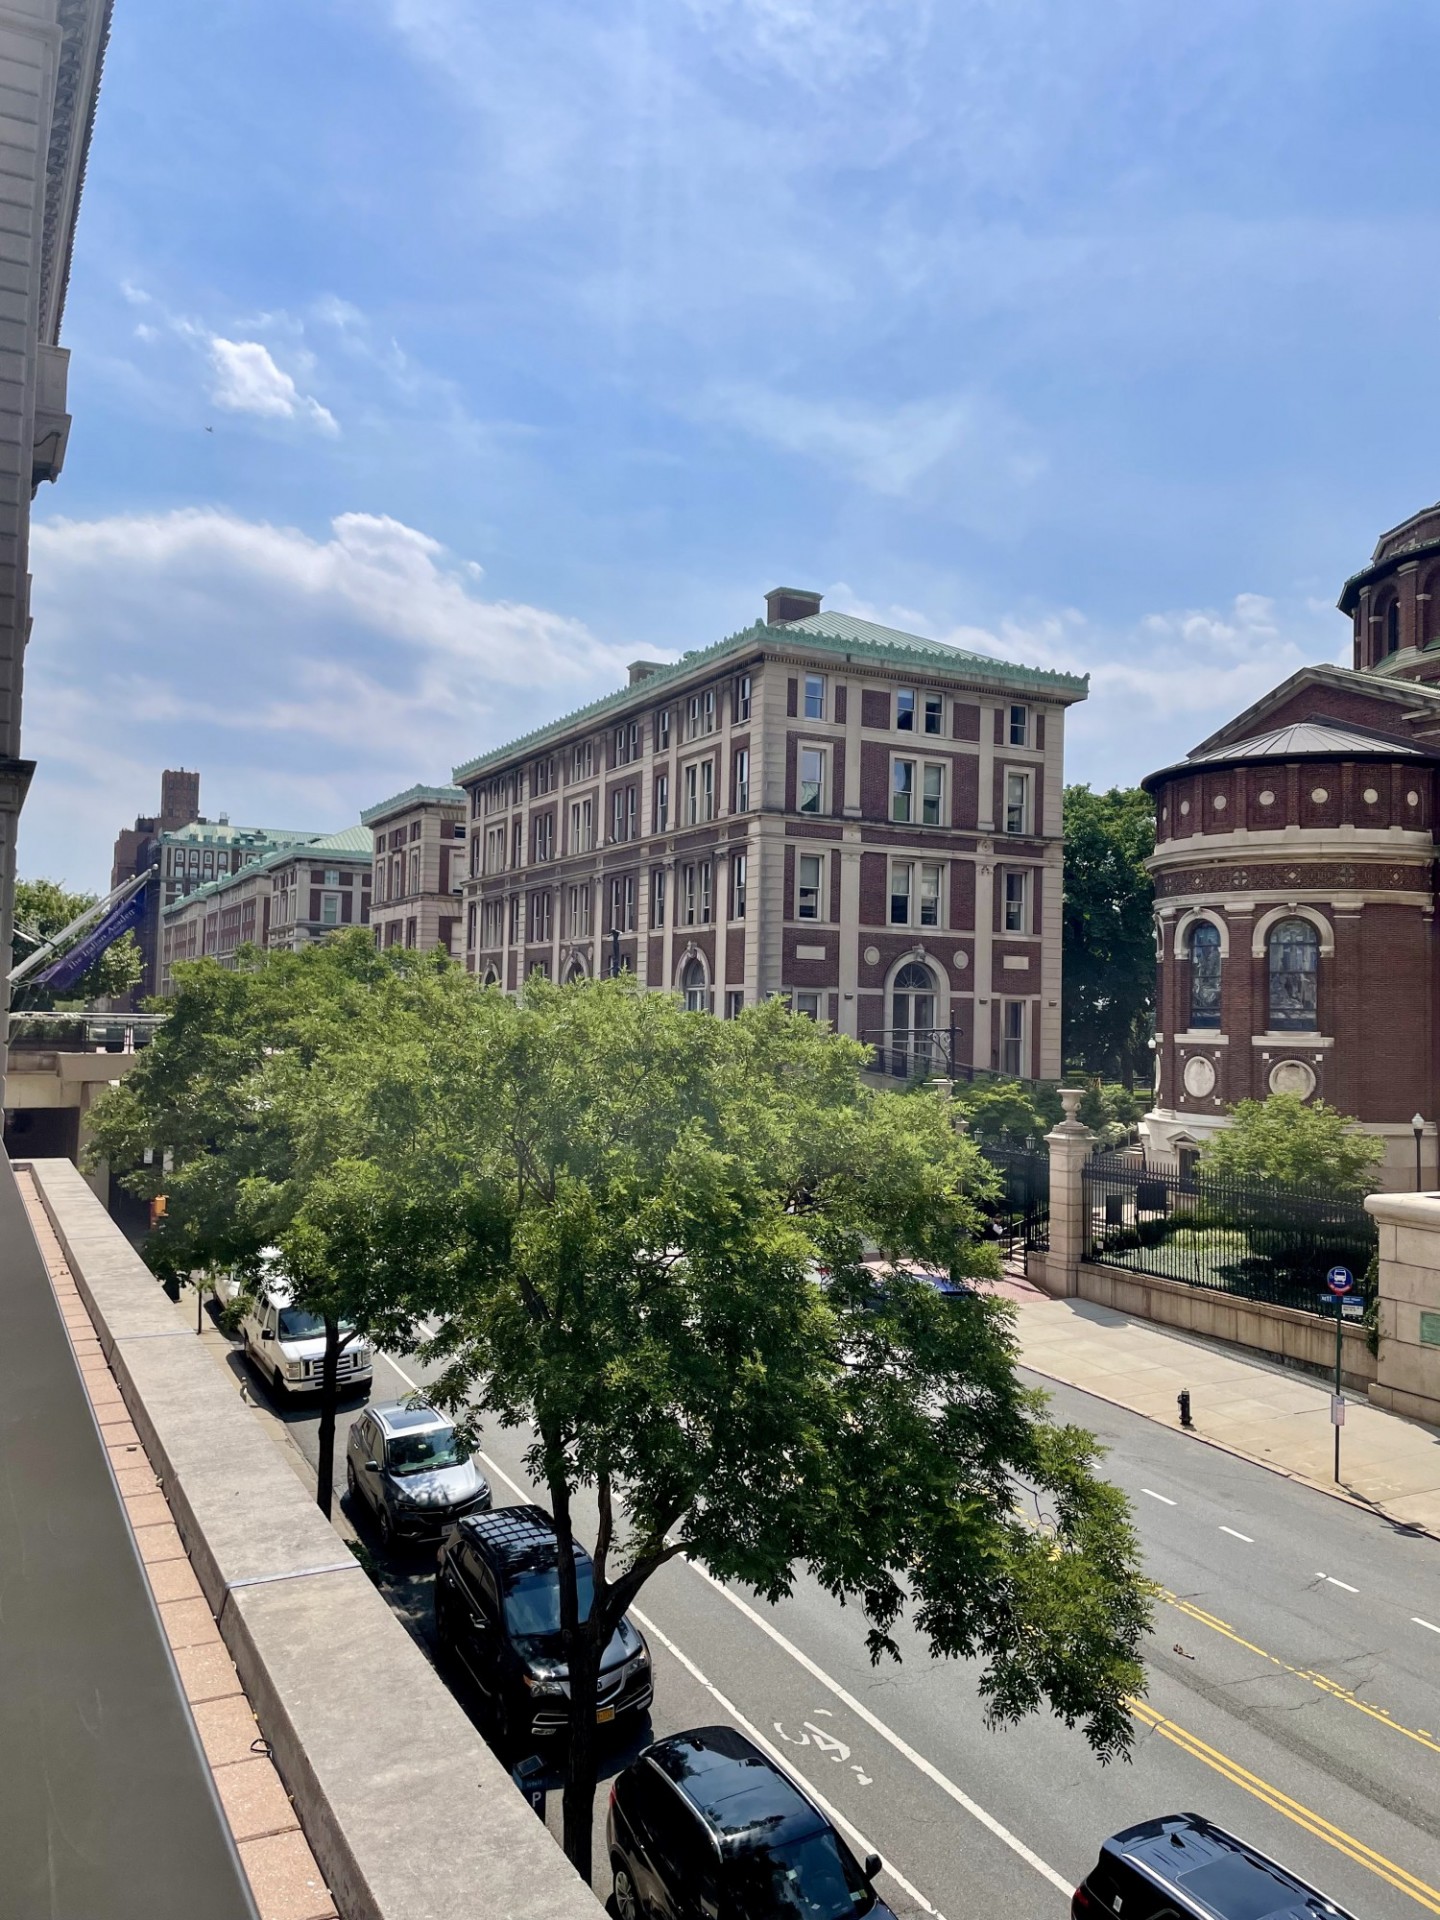 Photograph of campus buildings along Amsterdam Avenue: St. Paul's Chapel, Philosophy Hall and Kent Hall in foreground